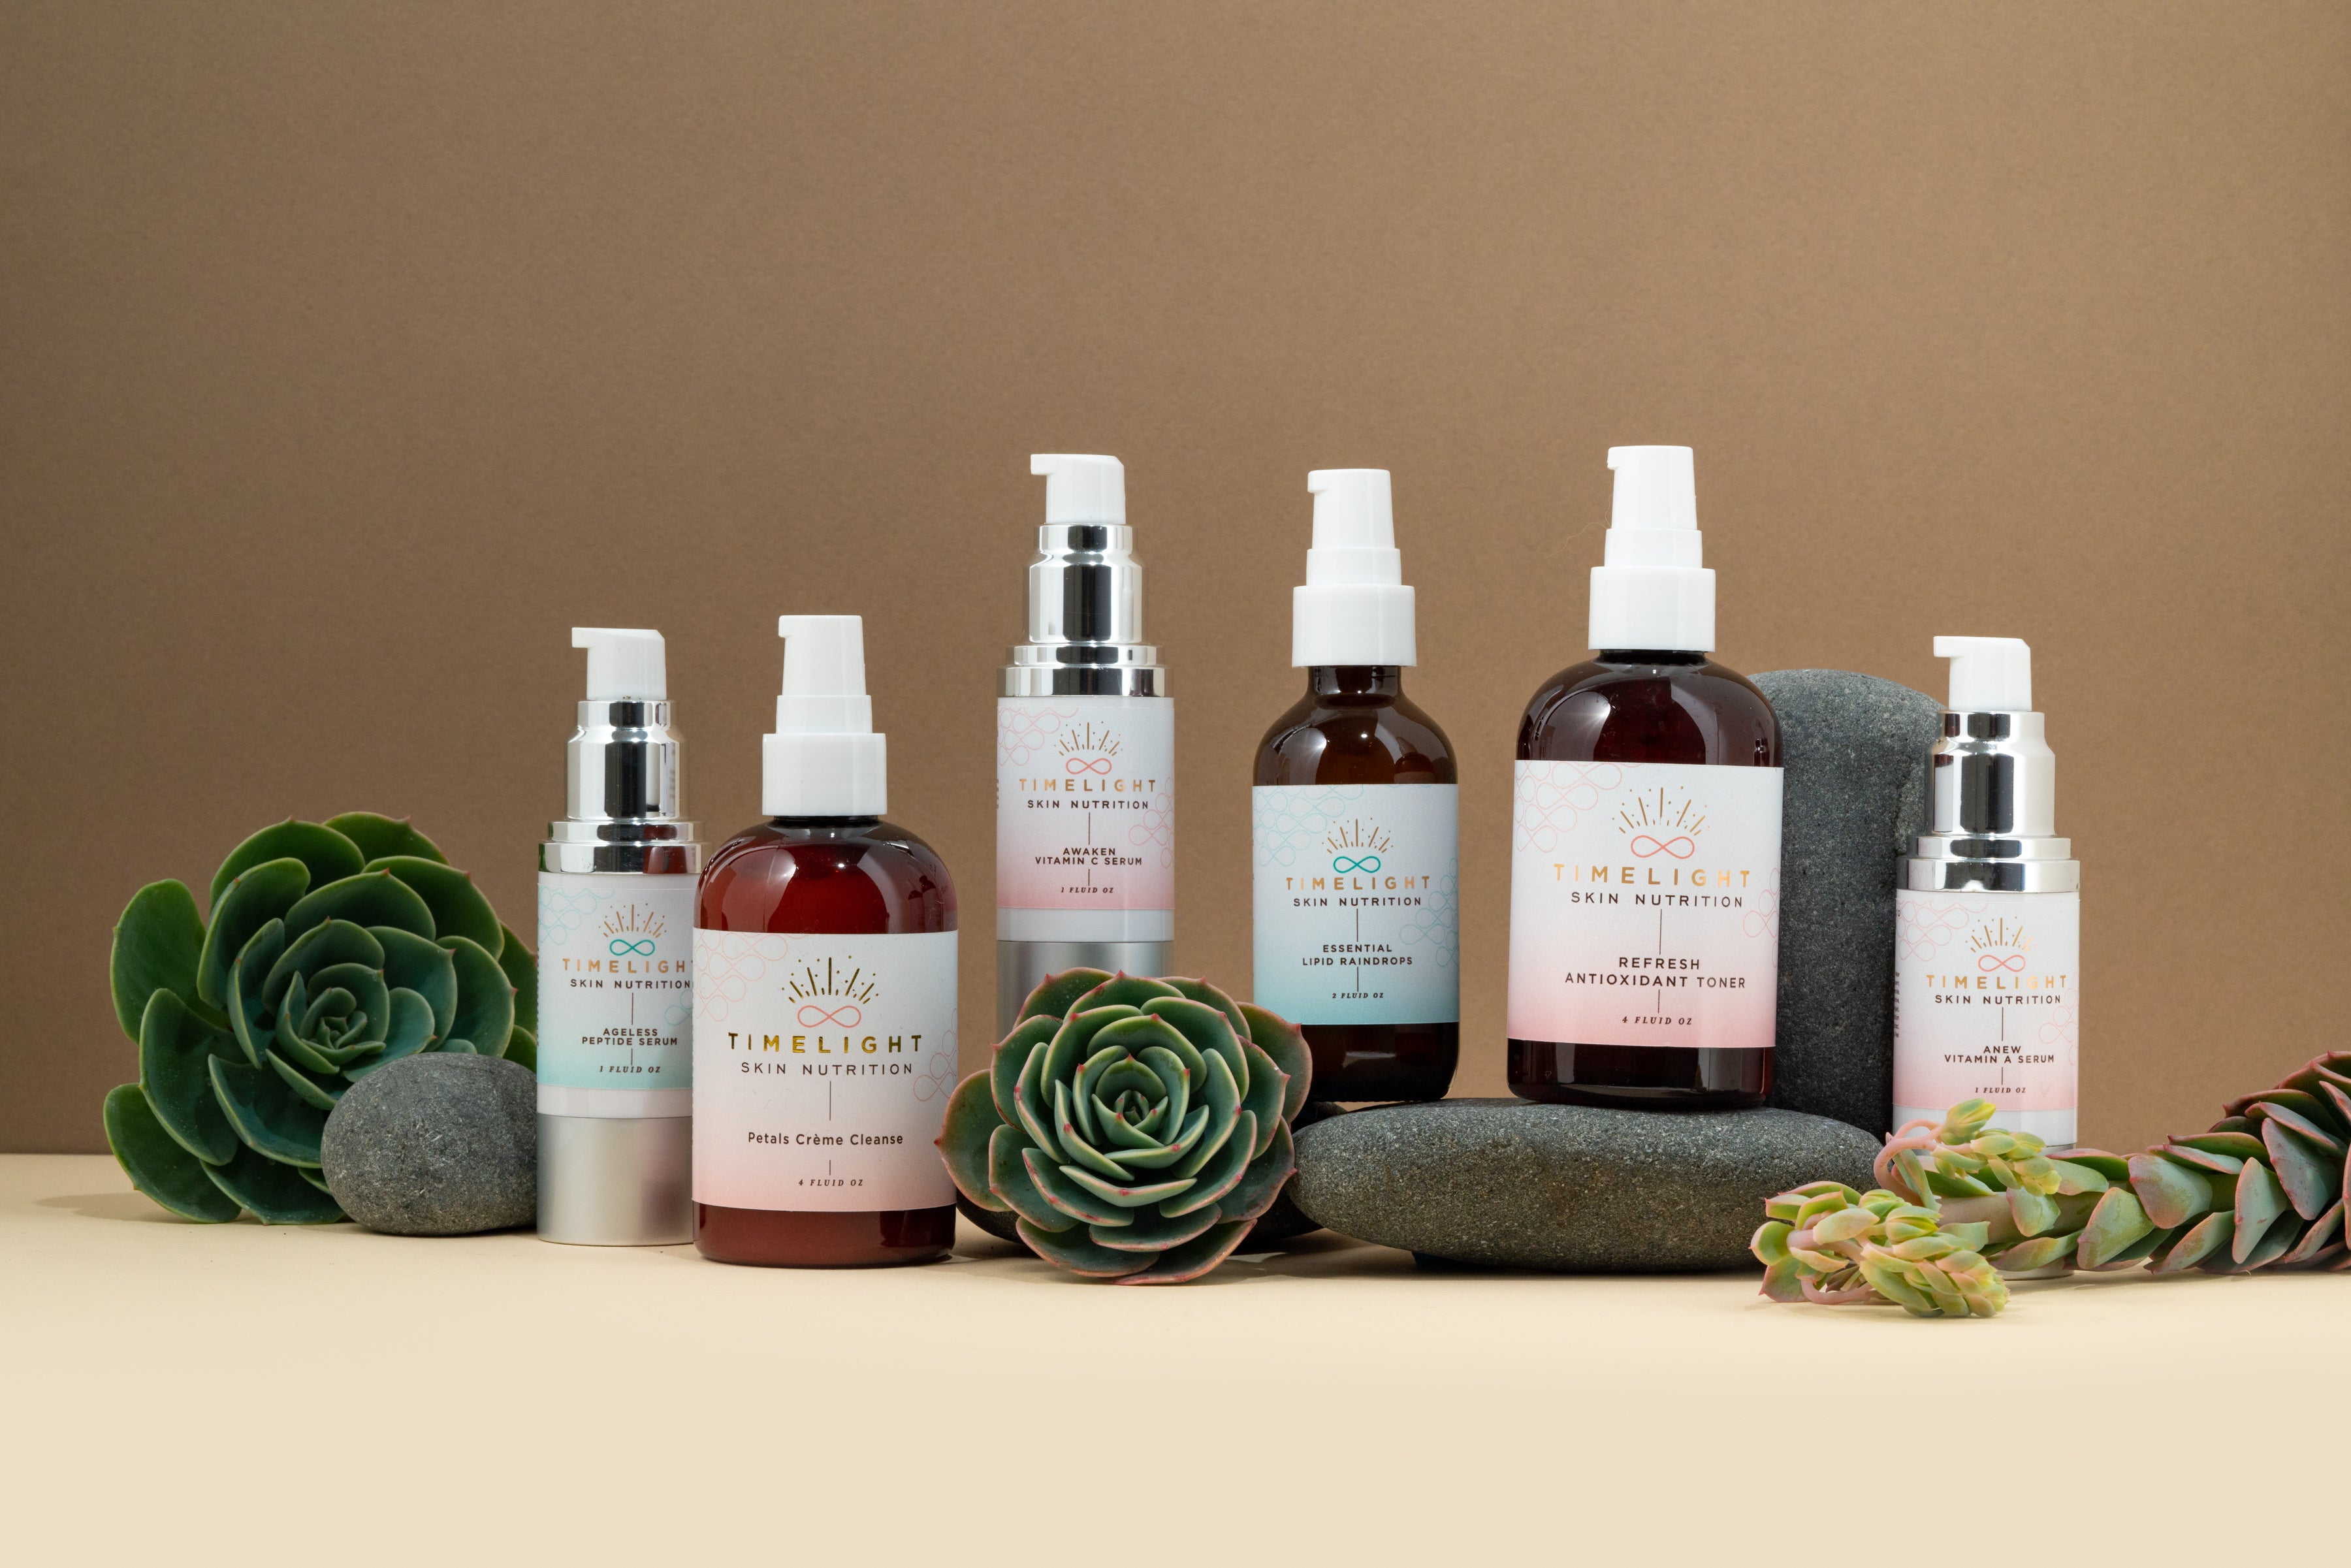 "TimeLight Skin Nutrition Collection products, including Electrolytes, Retinaldehyde Slow Release Vitamin A, Argireline Peptide, L-Sodium-Hyaluronate, L-Ascorbic Acid, Acetyl Glutathione, Phospholipids & Royal Jelly, preserved with Organic Honeysuckle."